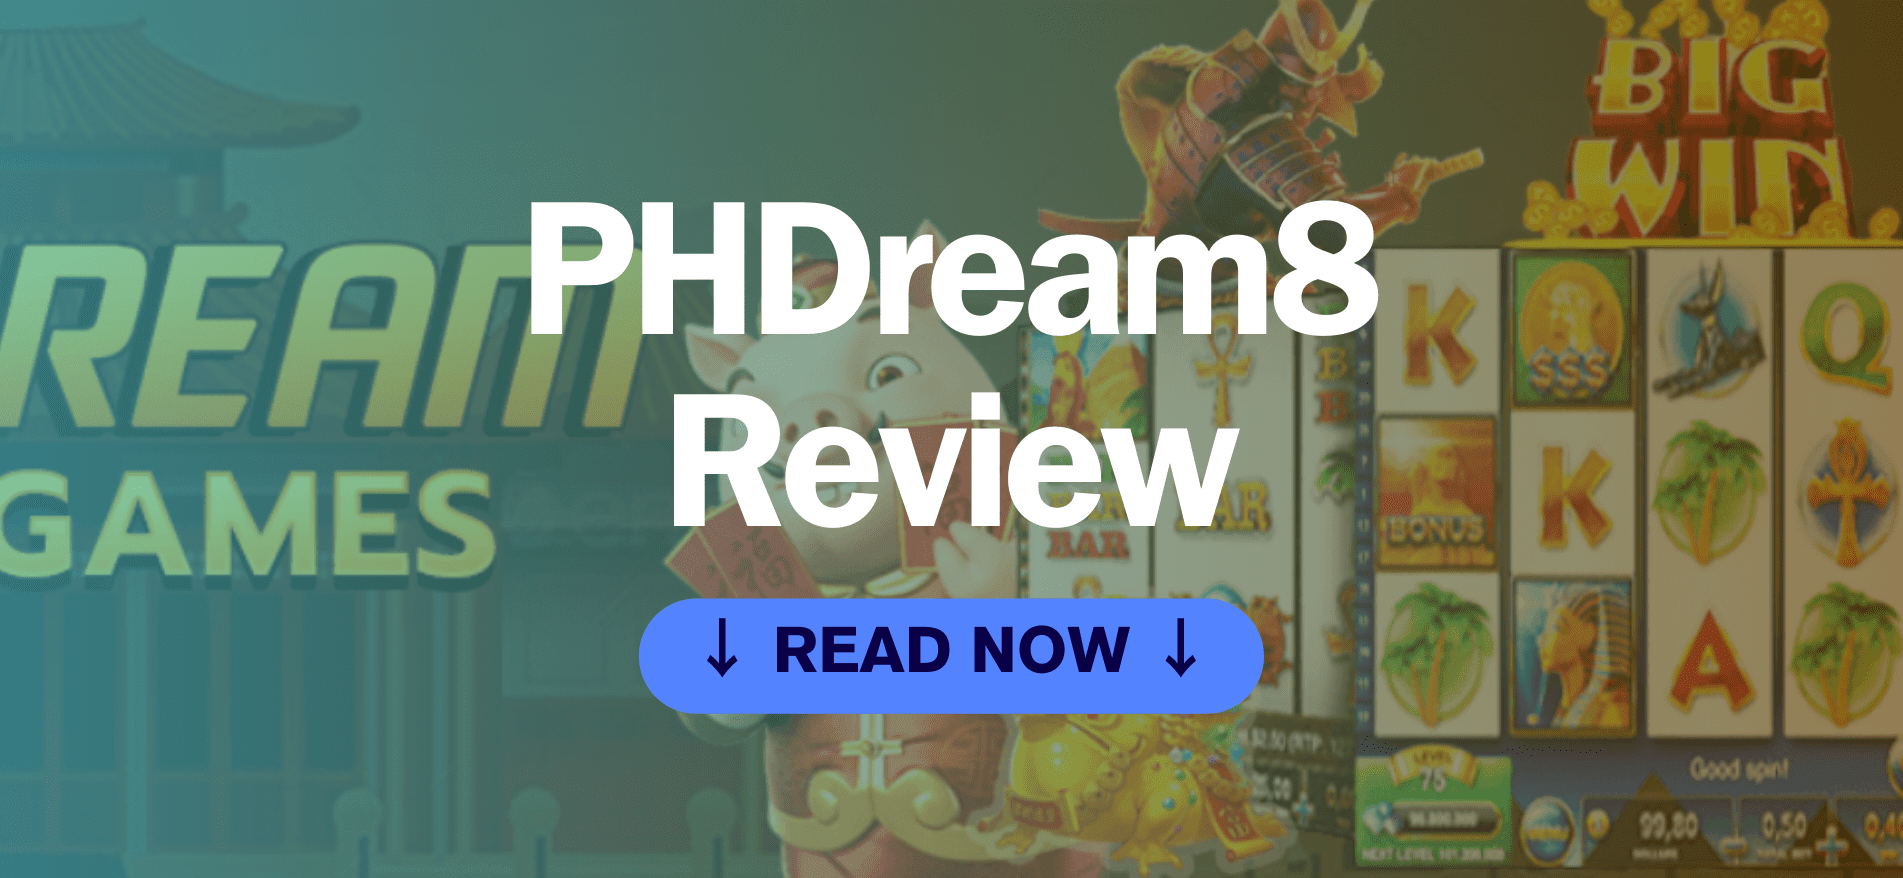 Phdream8 review